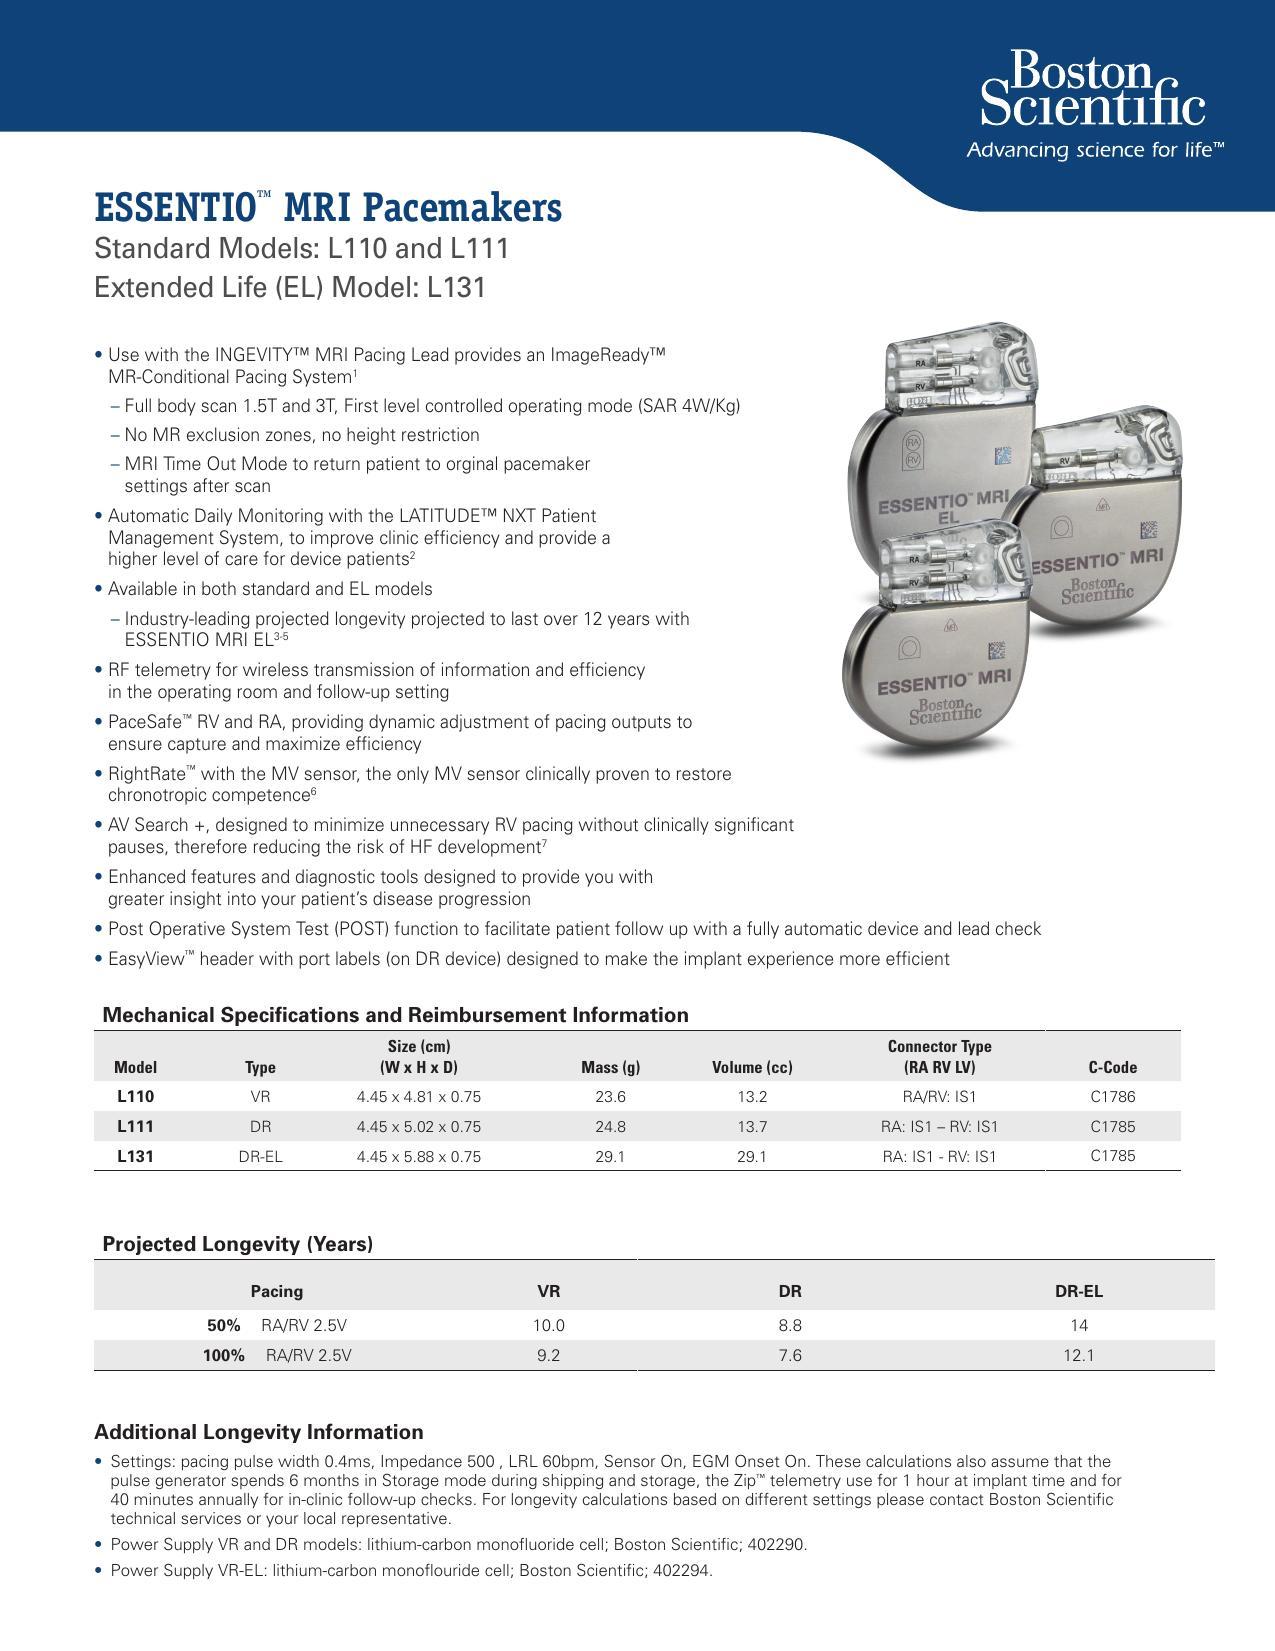 essentio-mri-pacemakers-standard-models-l110-and-l111-extended-life-el-model-l131-user-manual.pdf